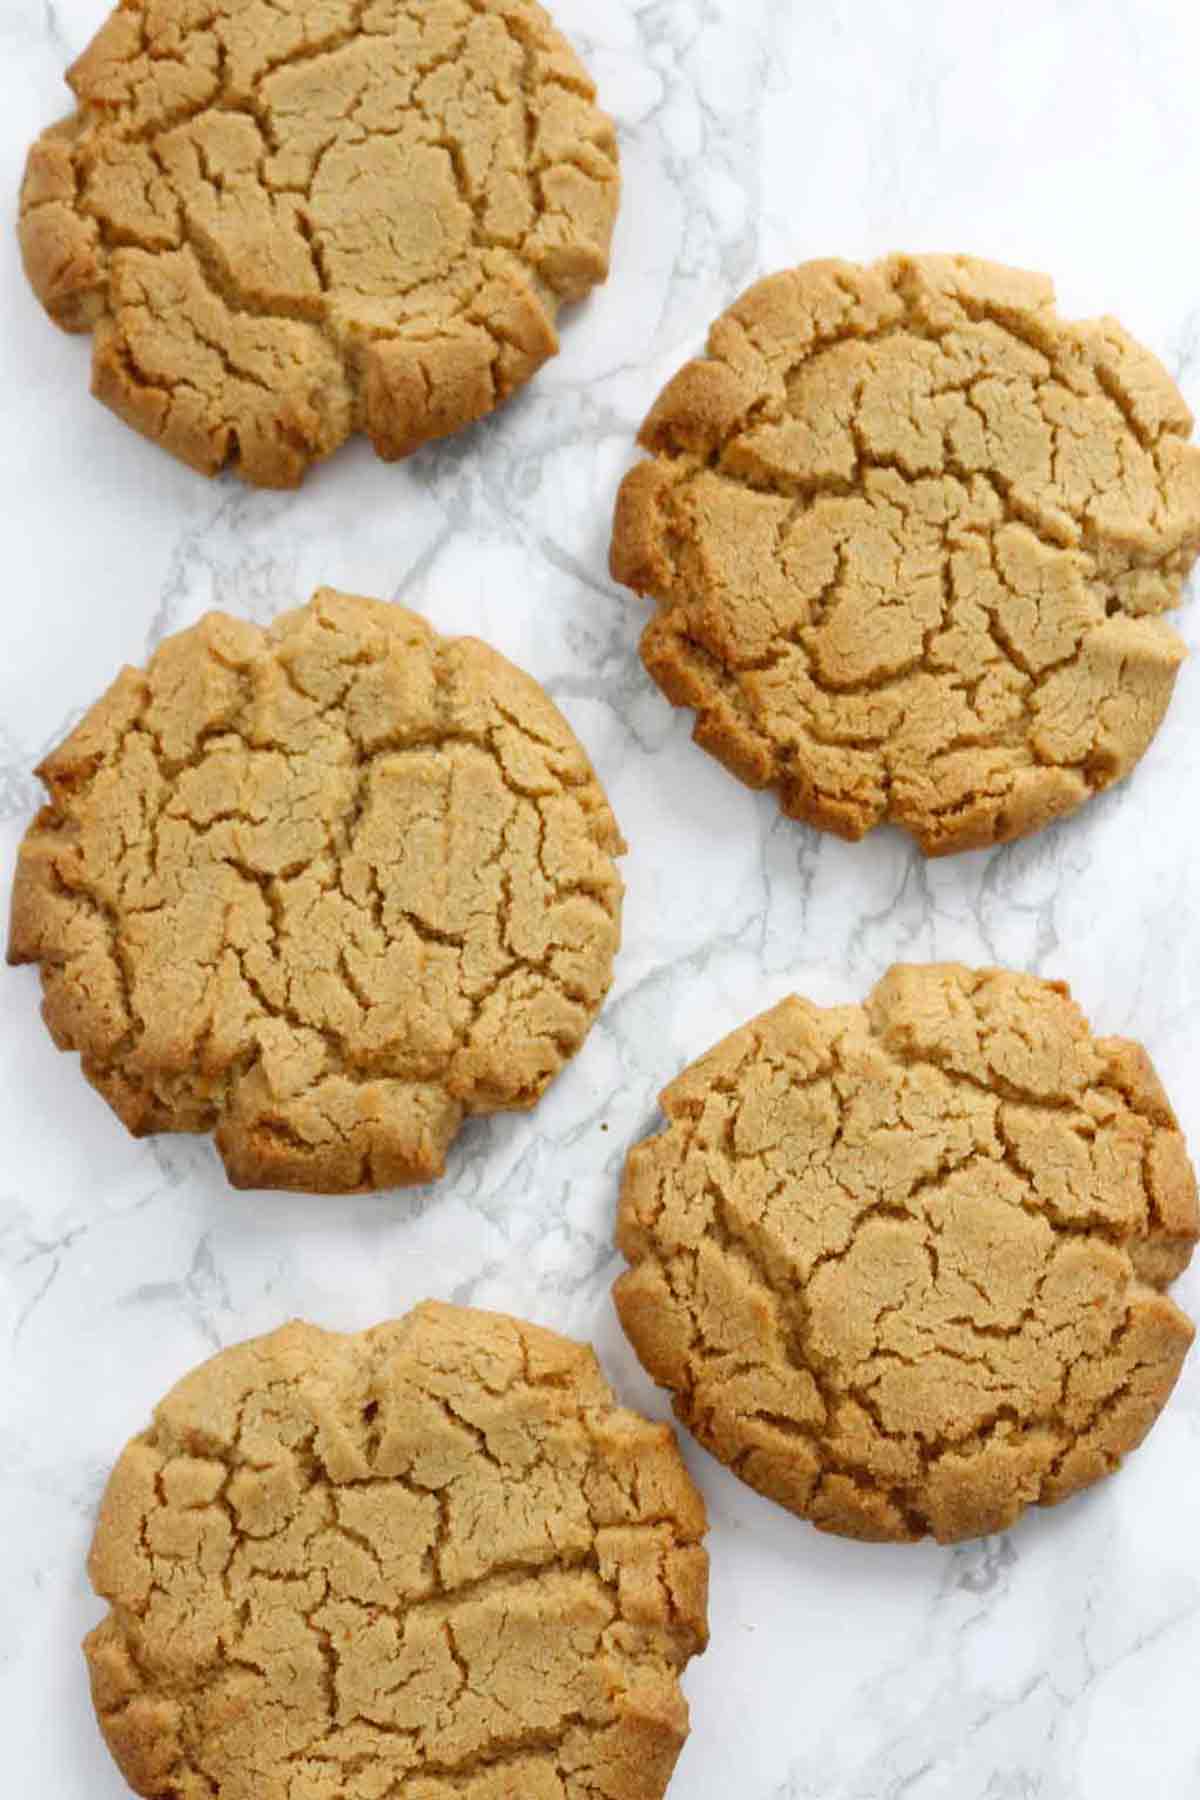 Vegan Peanut Butter Cookies On A White Surface